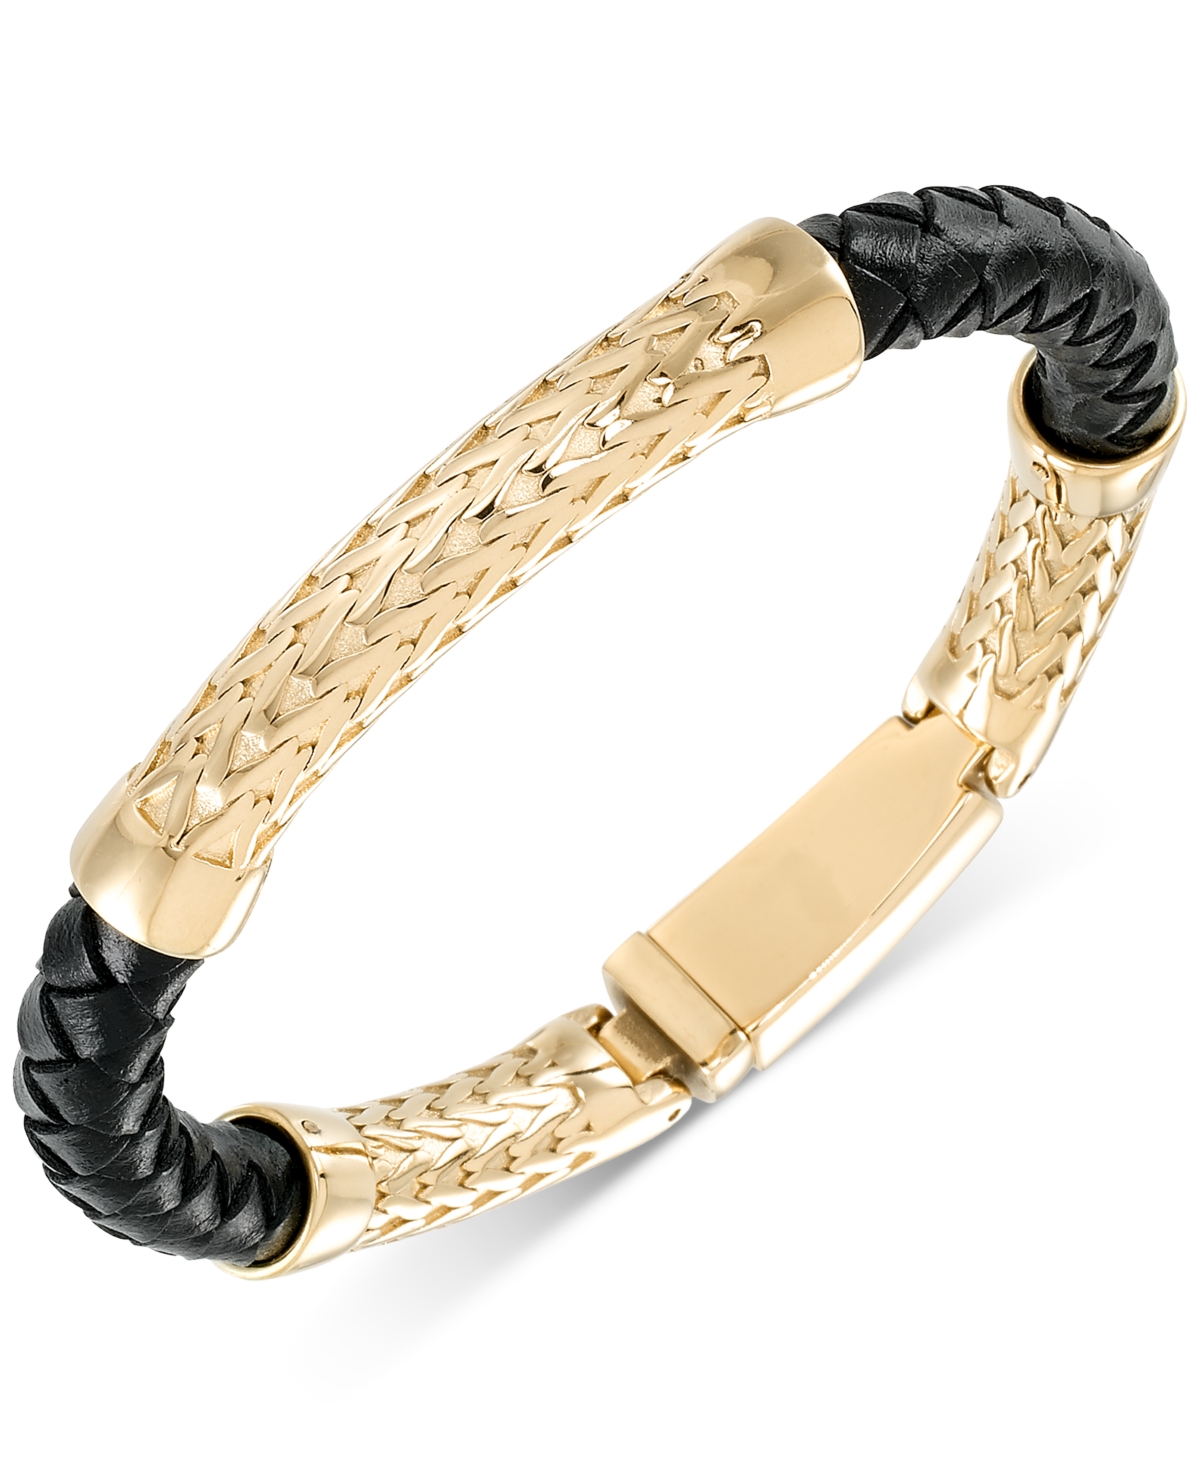 Smith Black Leather Bracelet in Stainless Steel - Gold-Tone